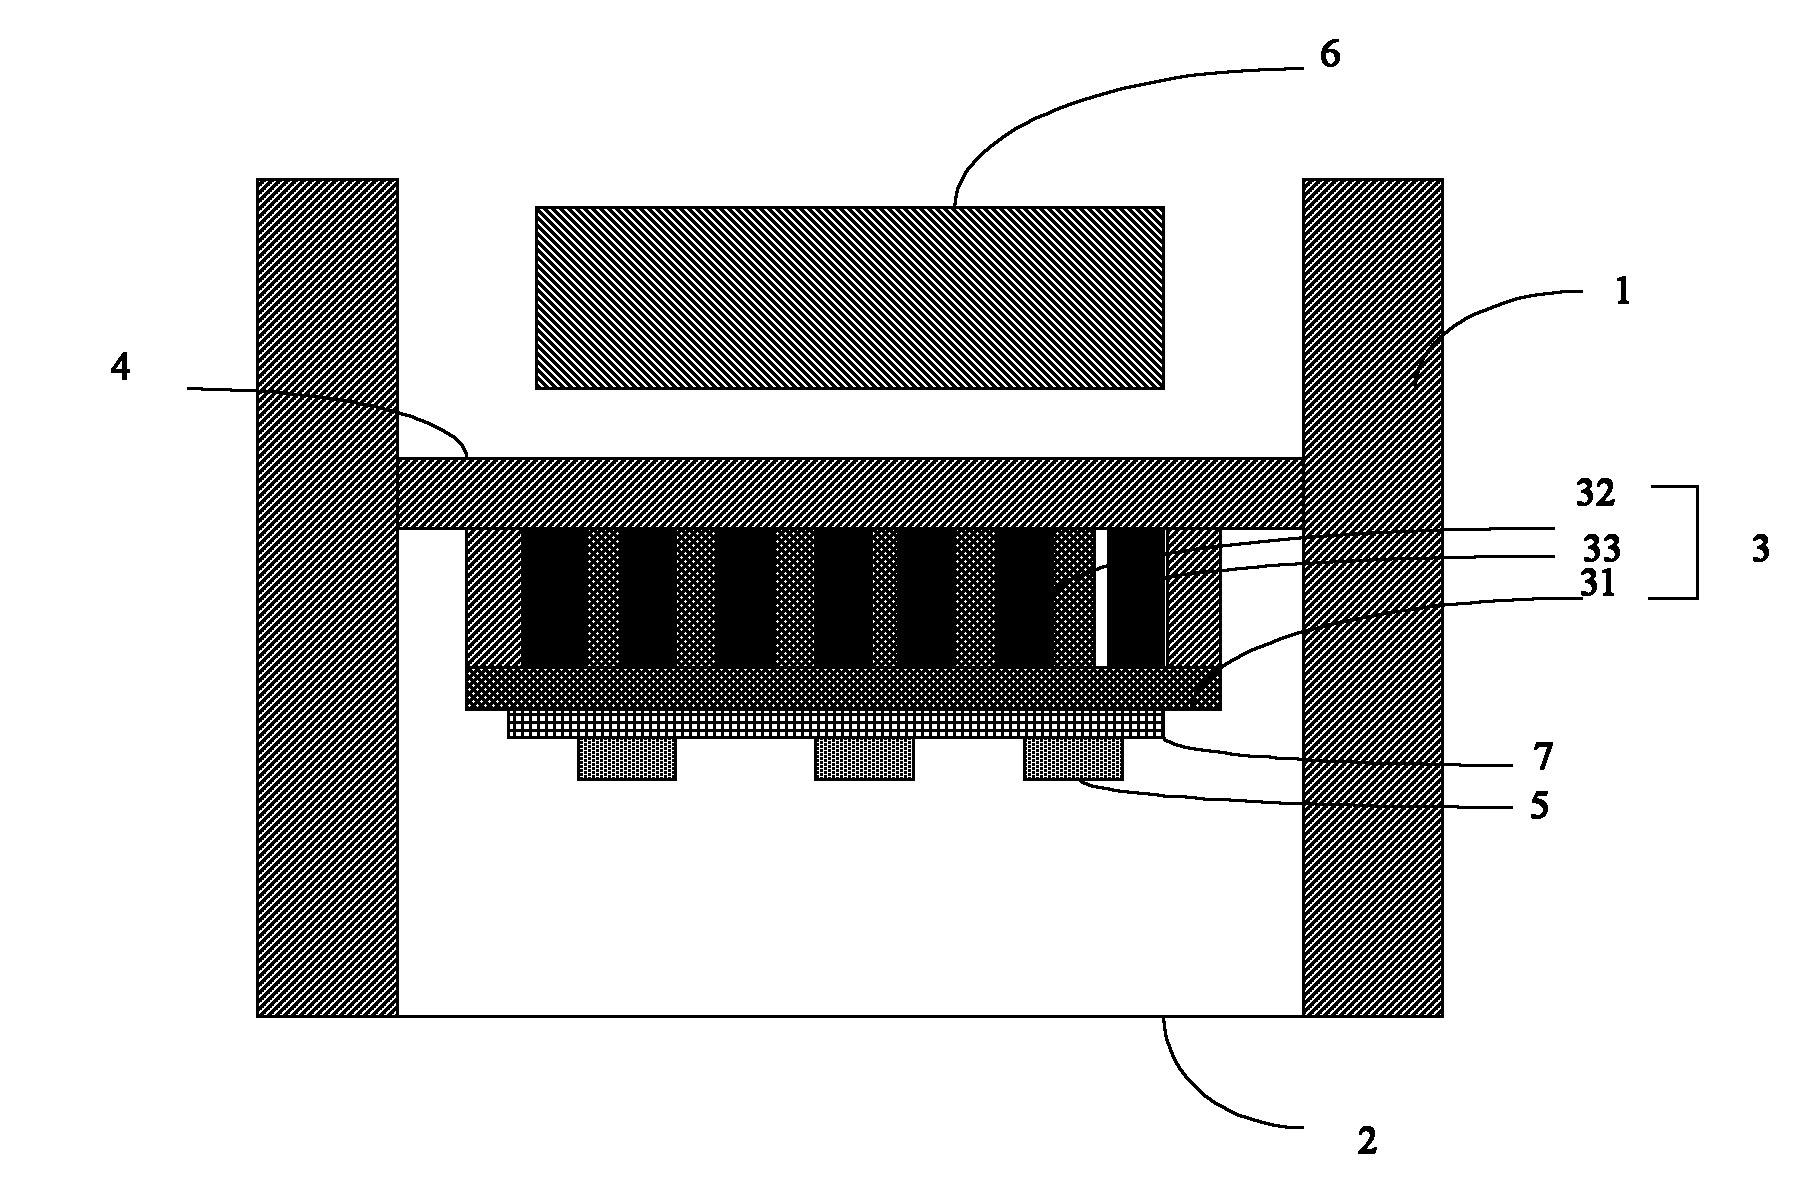 Heat-dissipation structure for LED (Light Emitting Diode) light